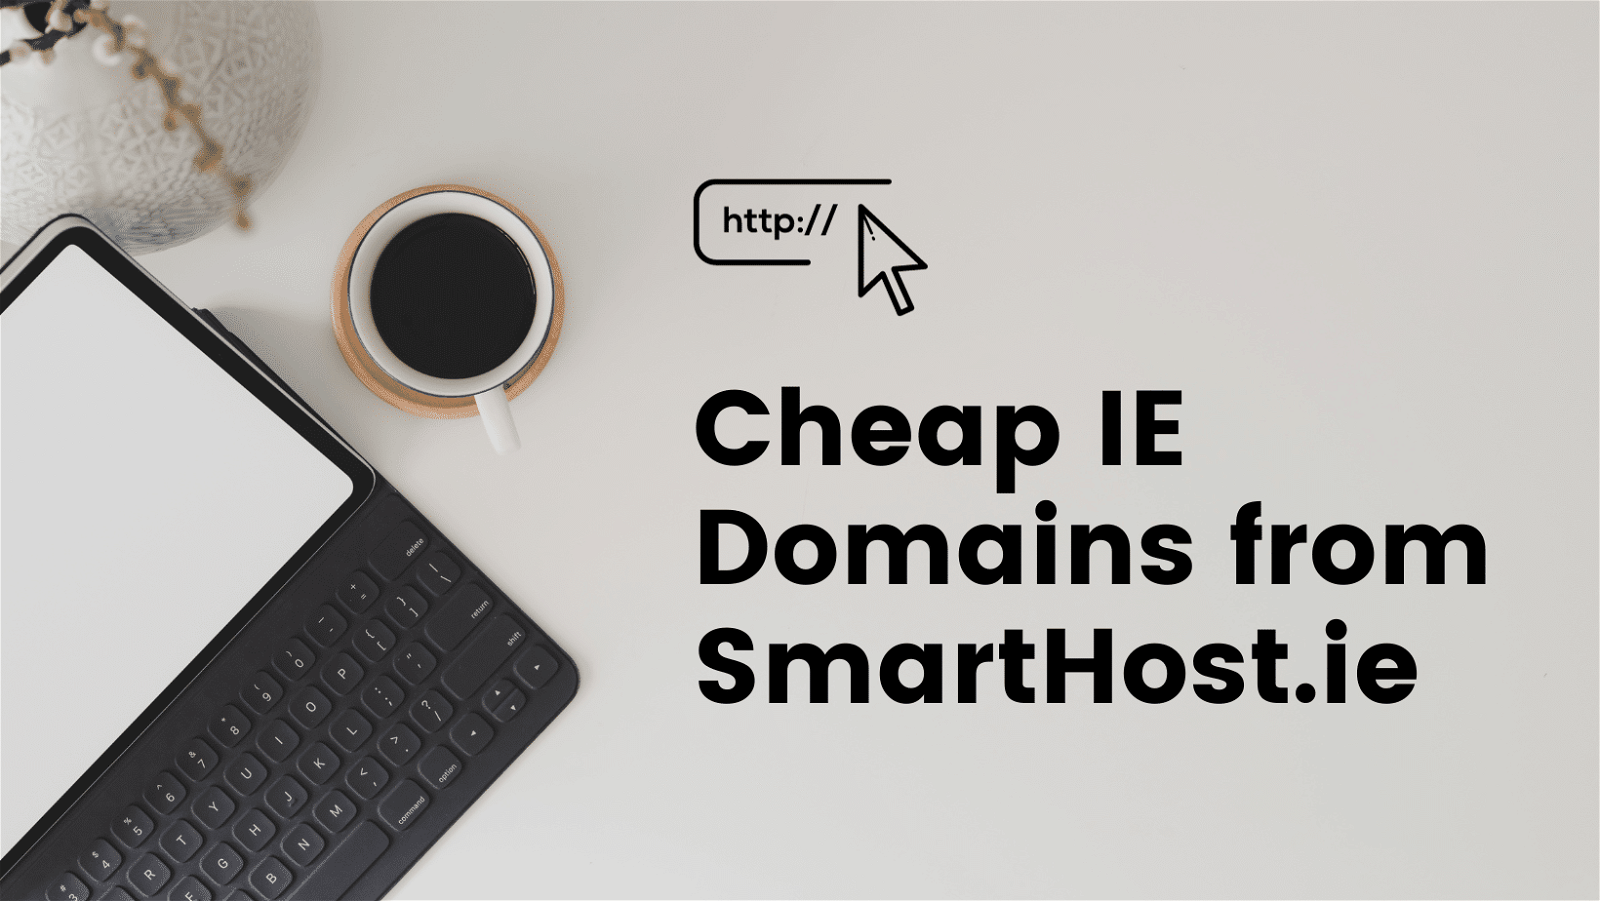 An image with a laptop and coffee cup, and a banner title Cheap IE Domains from SmartHost